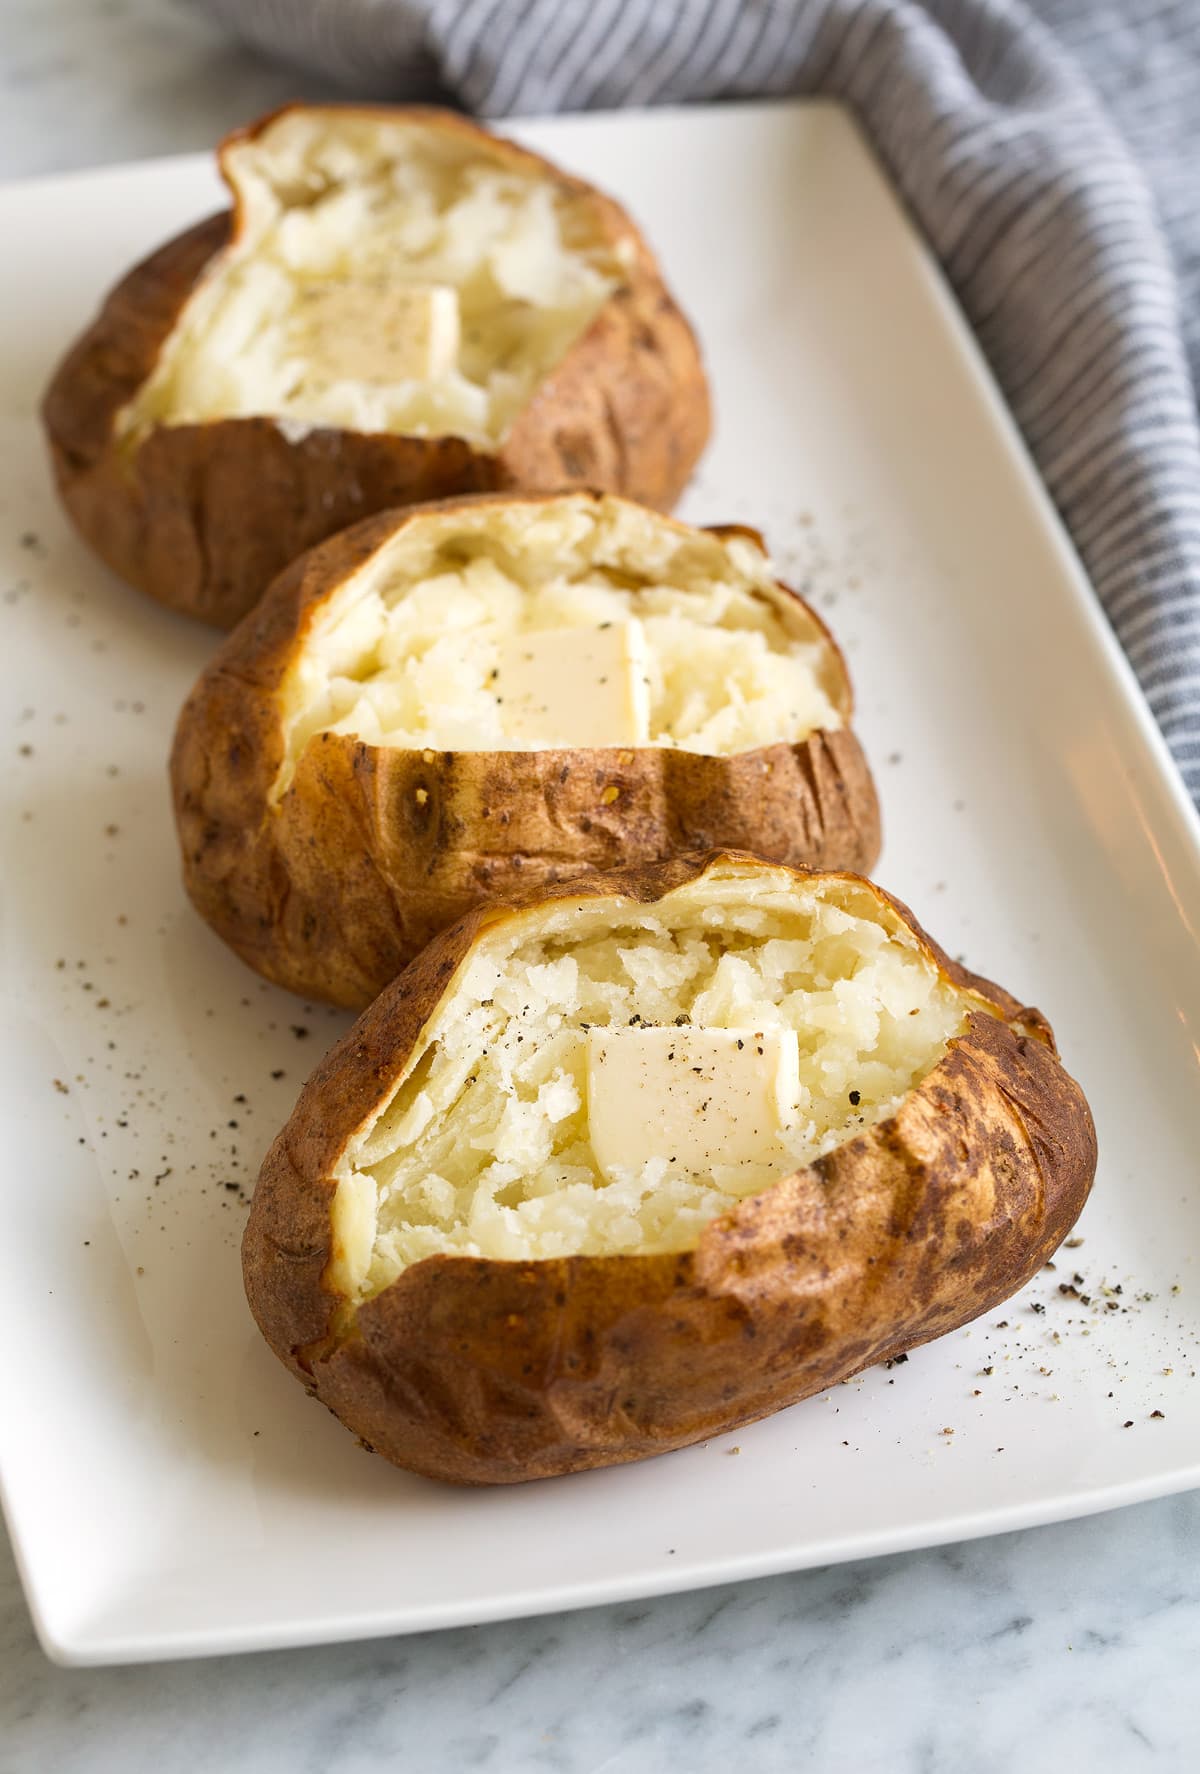 Most Popular Baking A Potato Ever – Easy Recipes To Make at Home